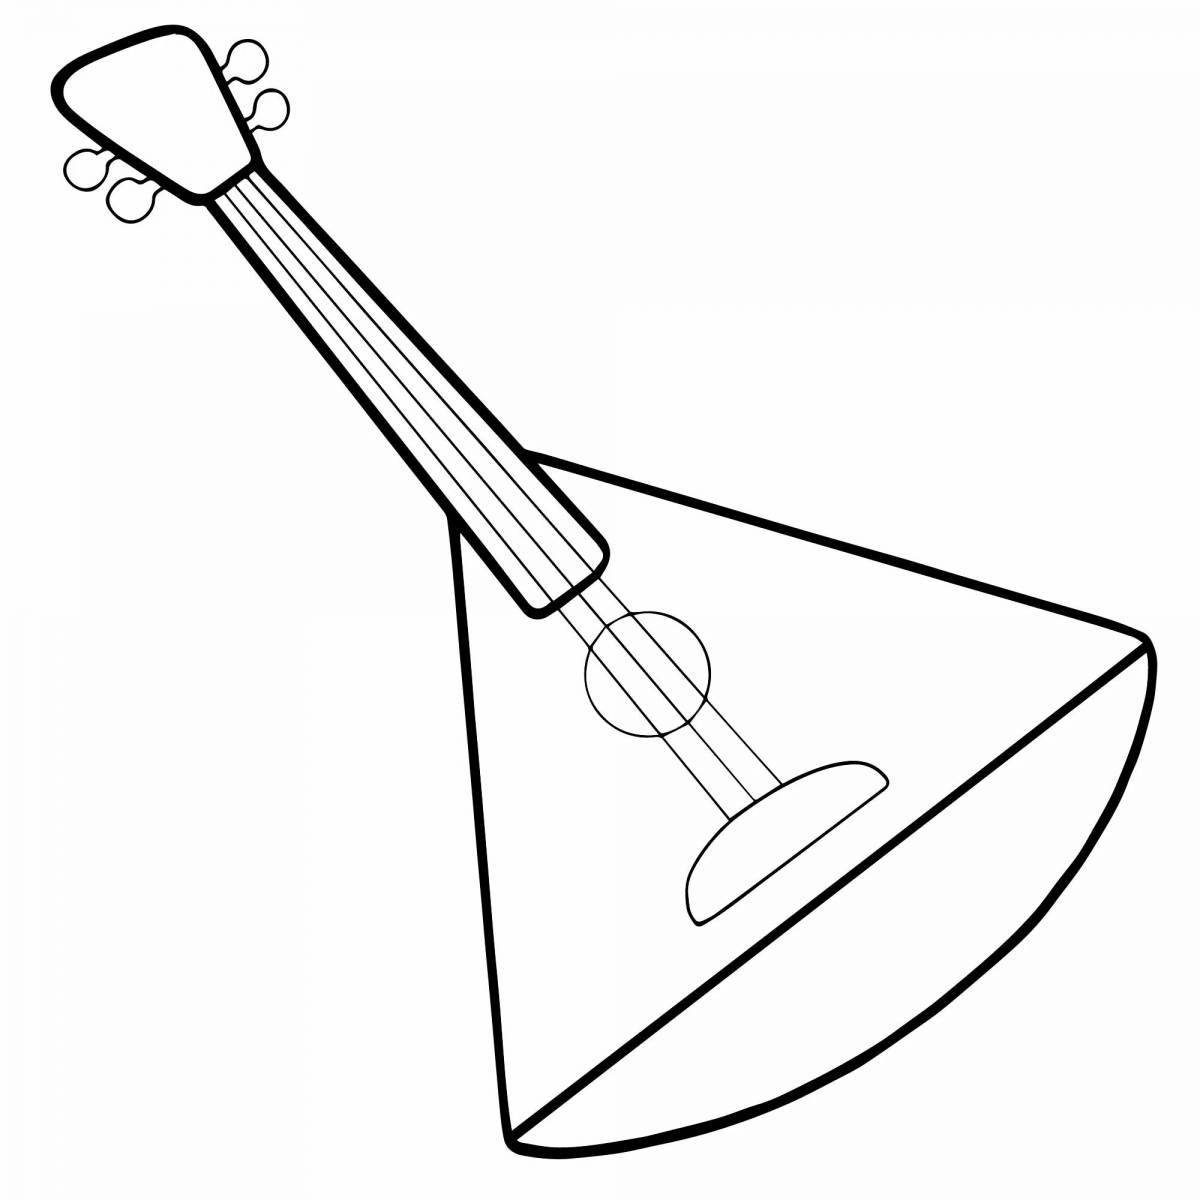 Coloring page incredible russian folk musical instruments